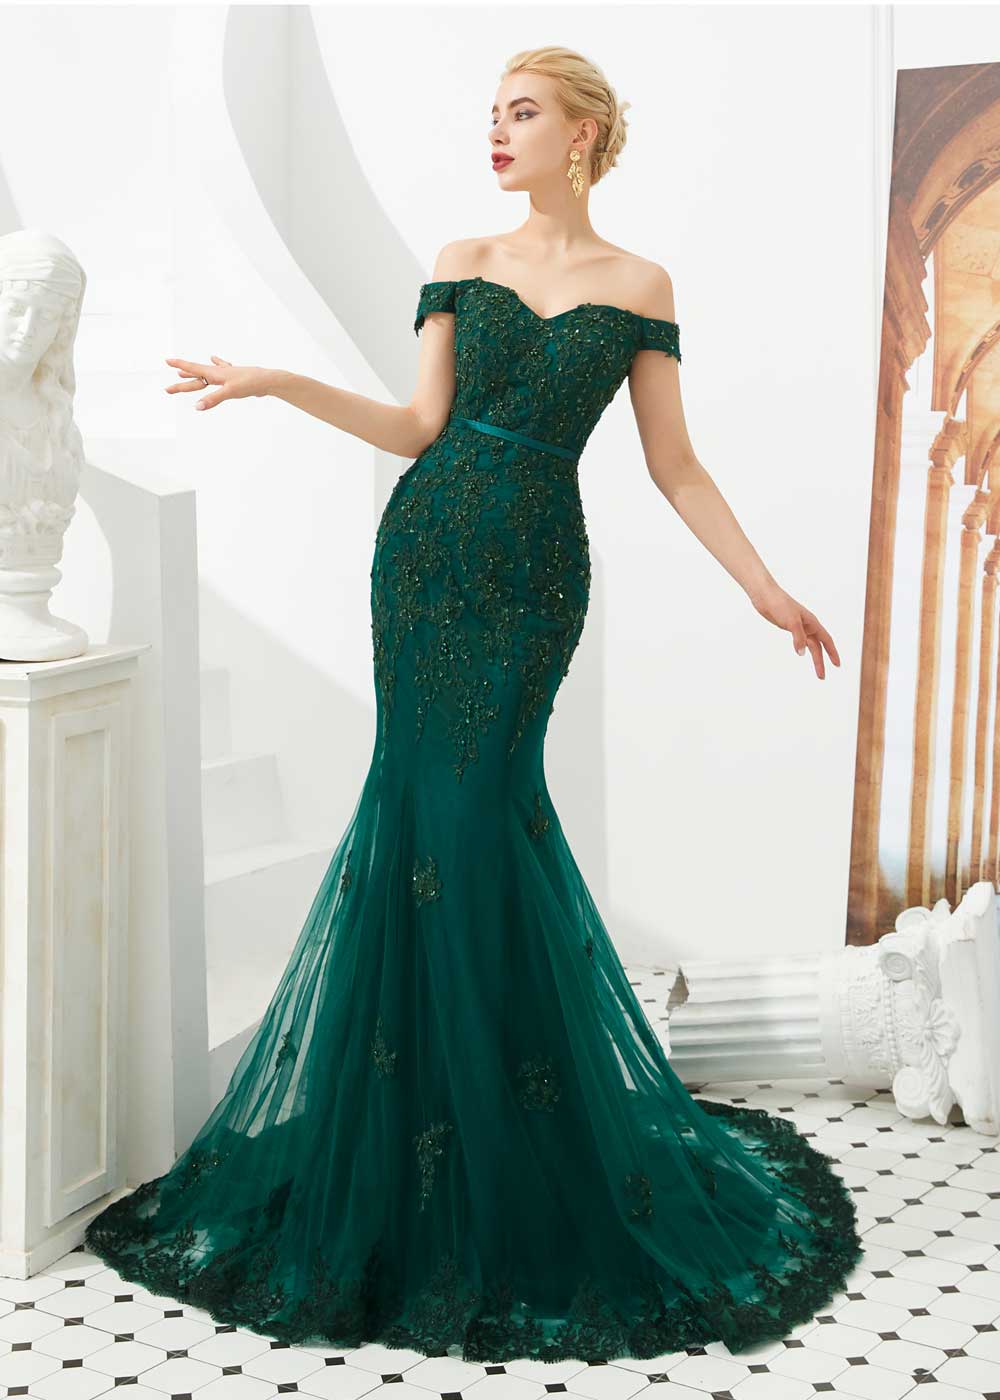 Emerald Green Mermaid Luxury African Prom Dress For Black Girl Gold  Applique Diamond Crystal Gillter Skirt Evening Formal Gown - AliExpress